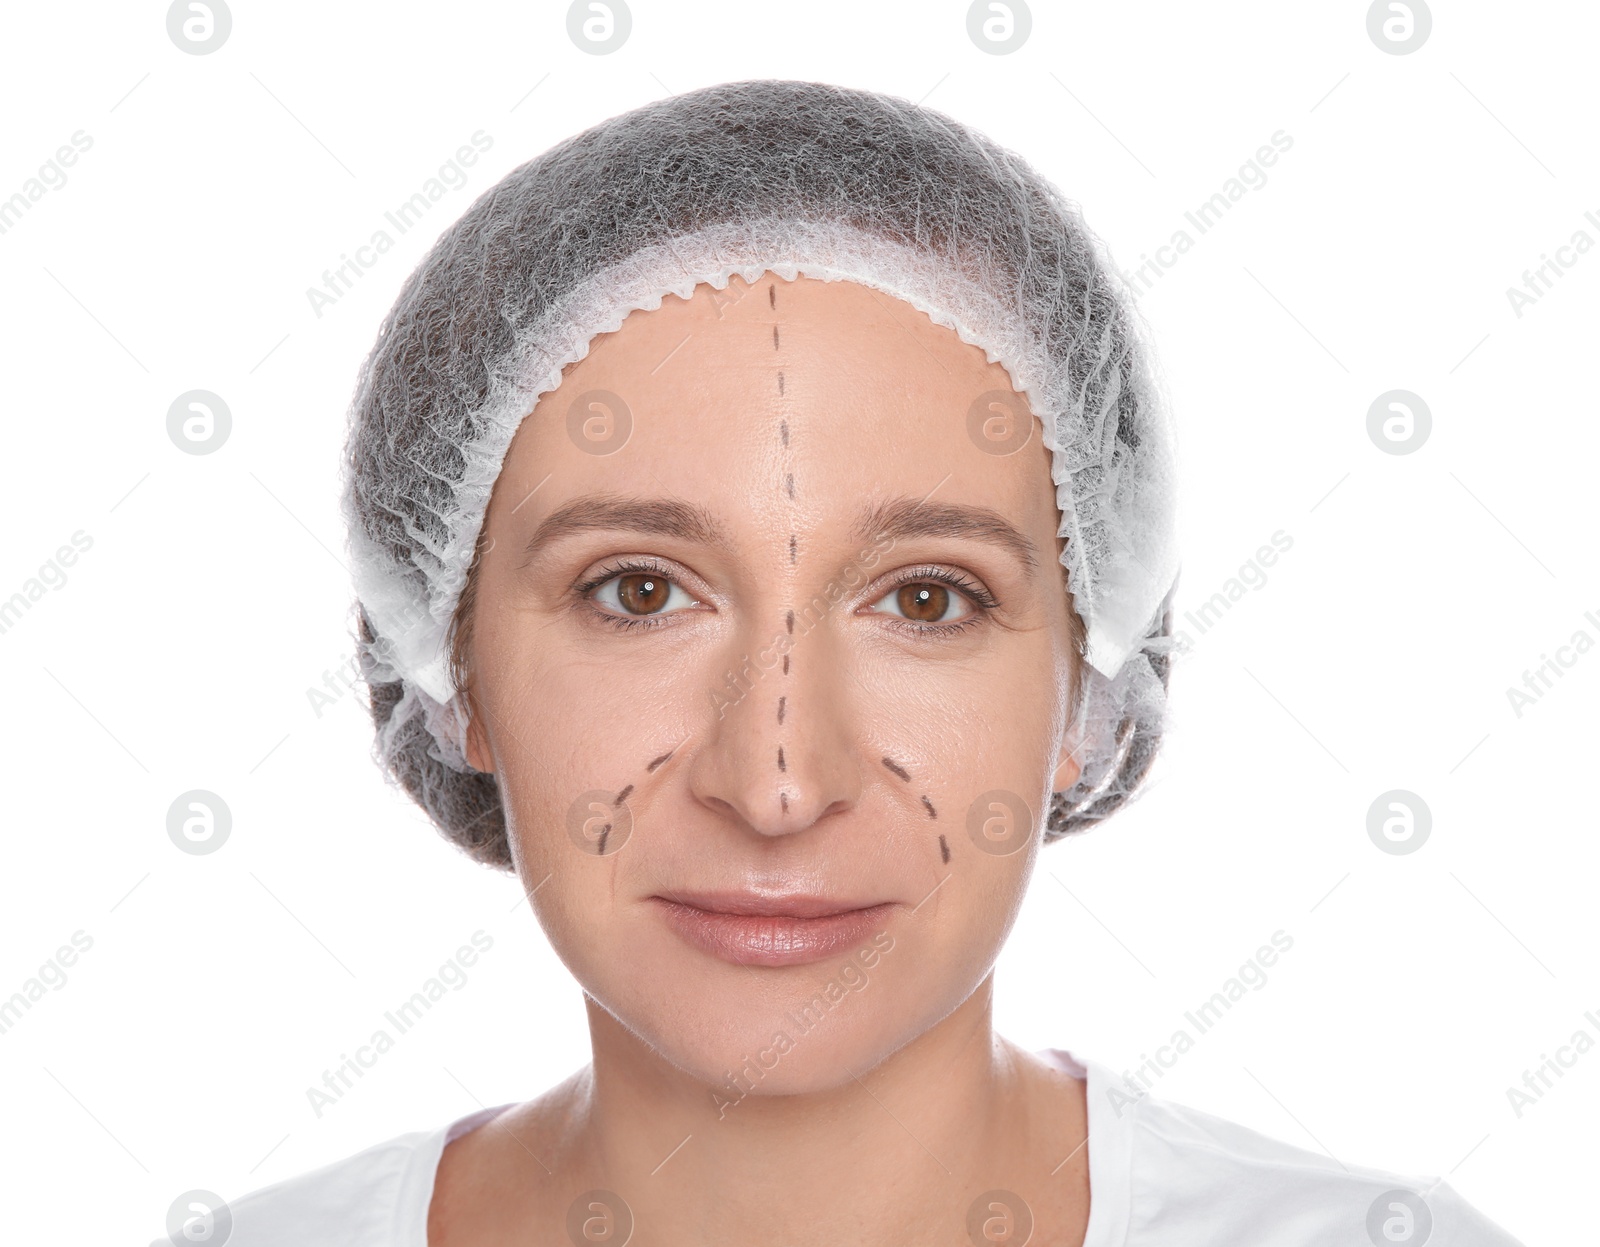 Photo of Portrait of woman with marks on face preparing for cosmetic surgery against white background